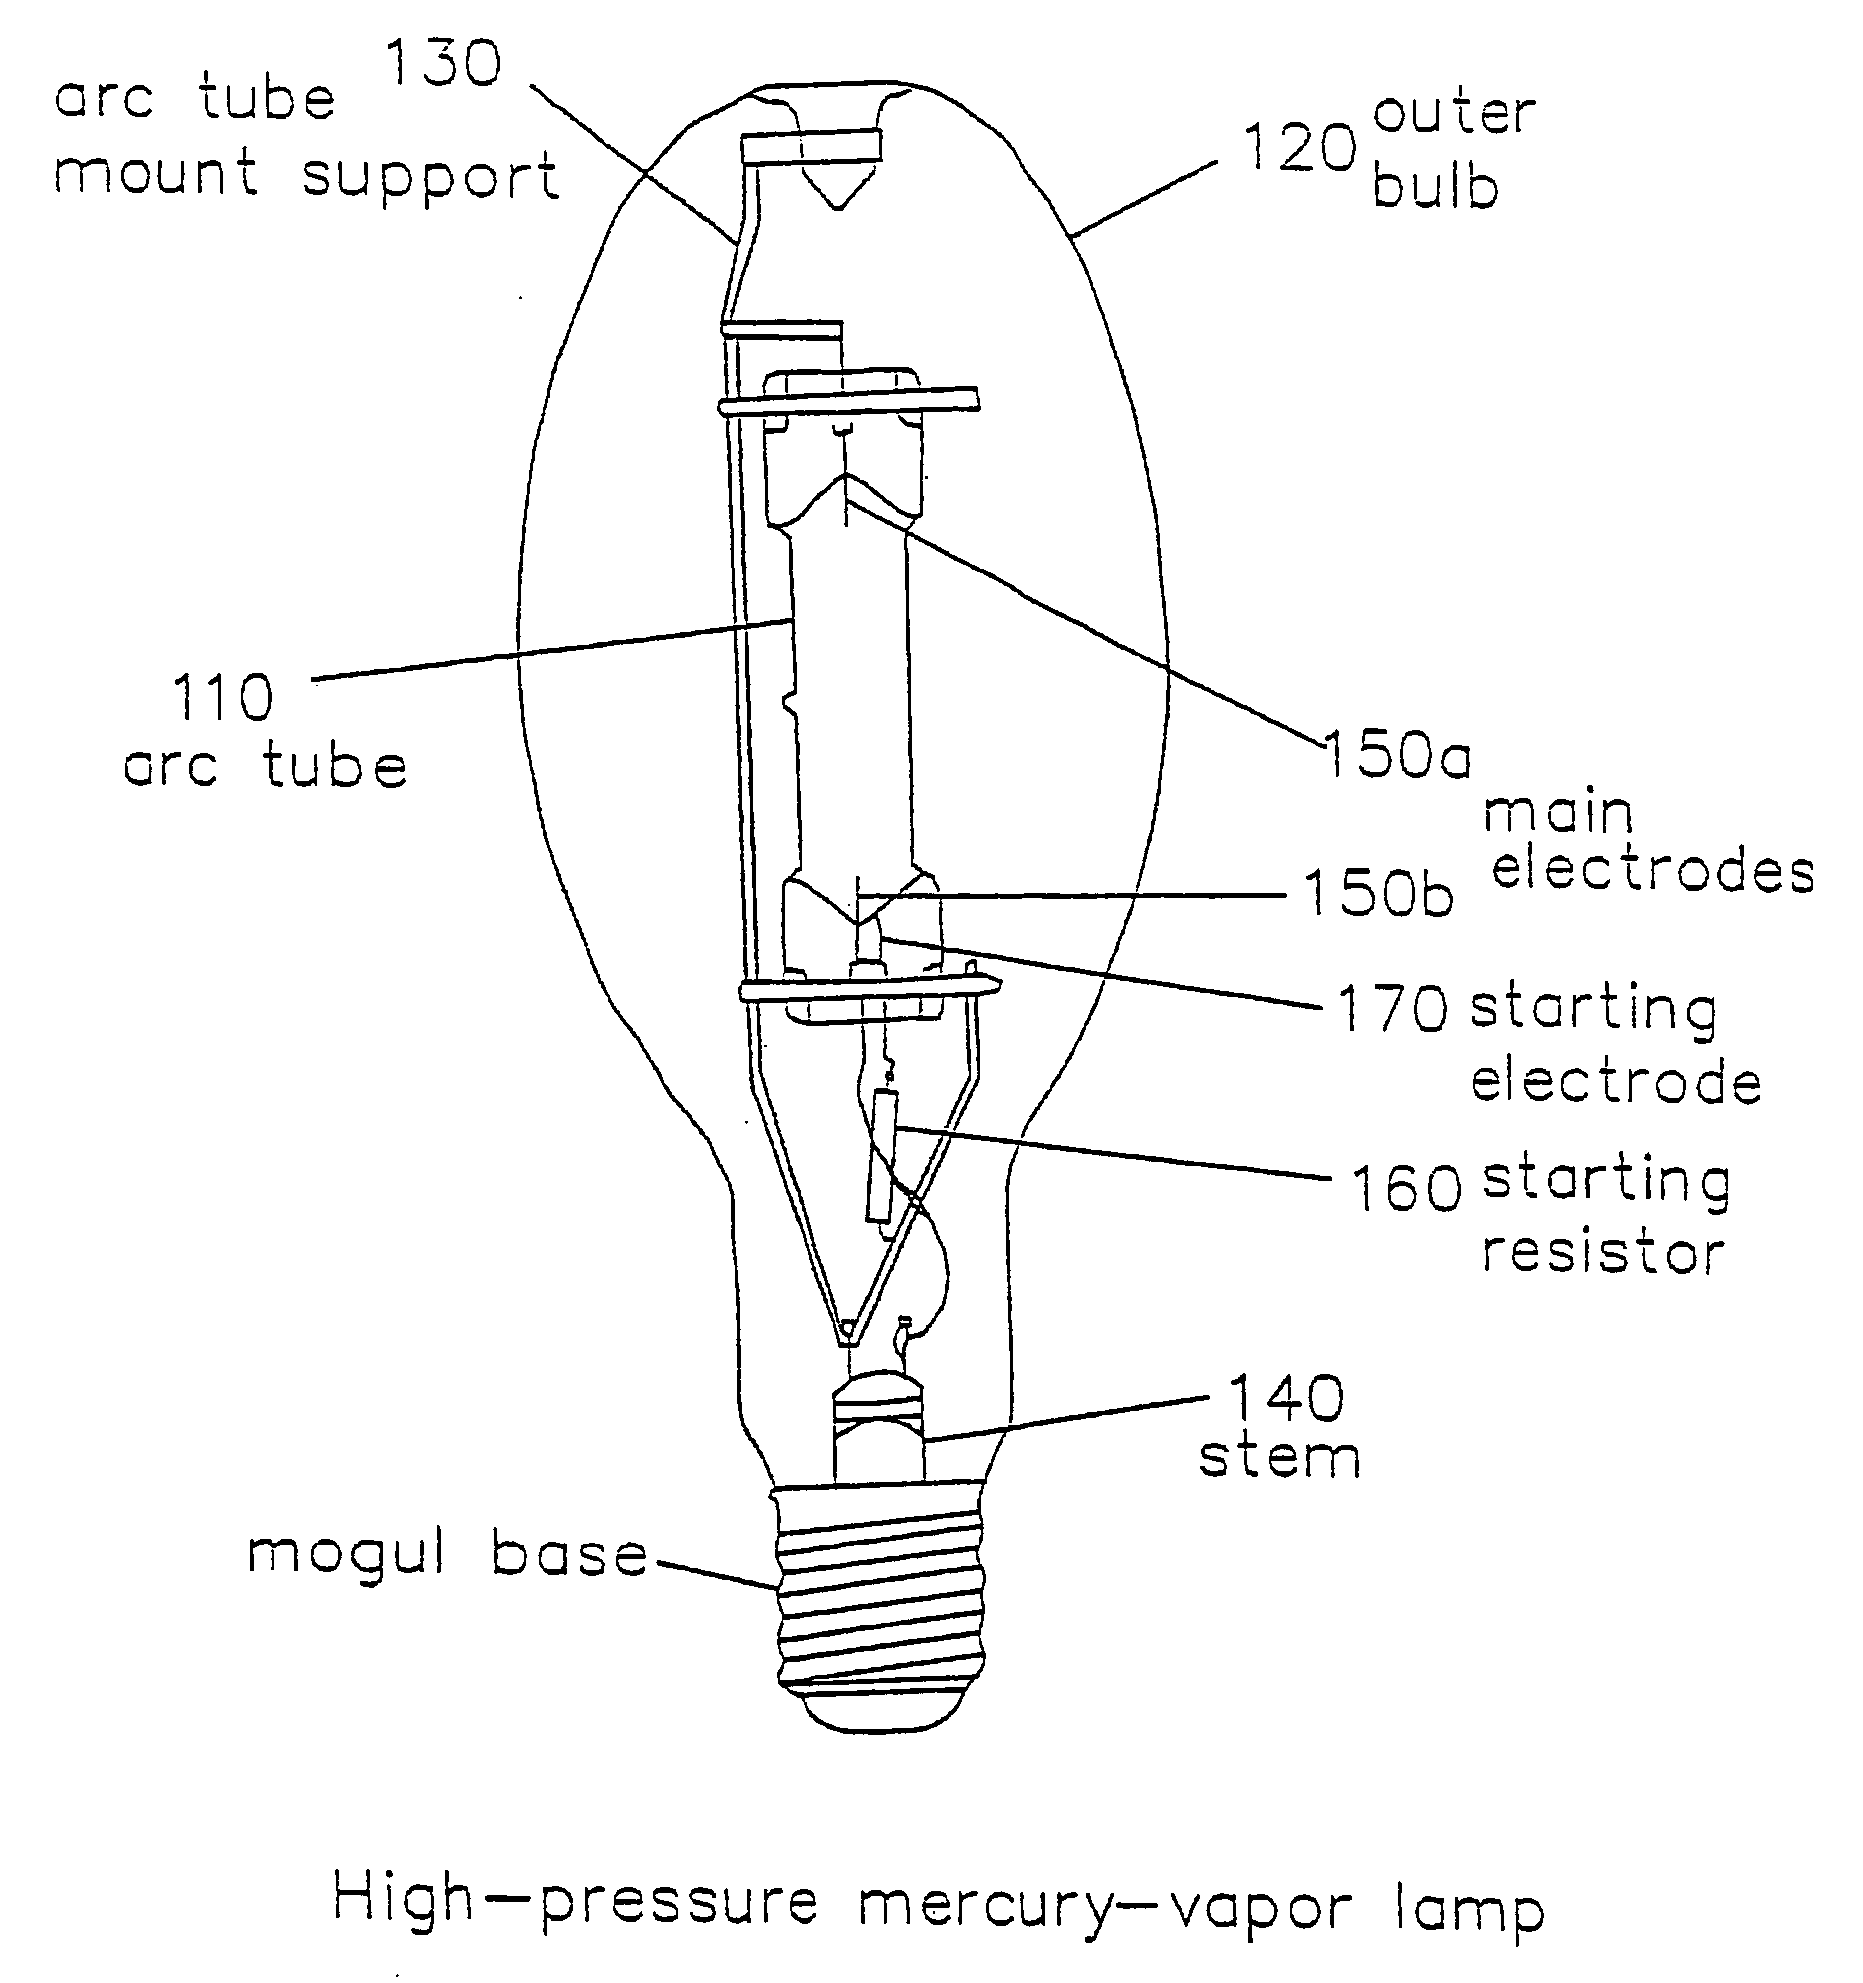 Lamp monitoring and control system and method